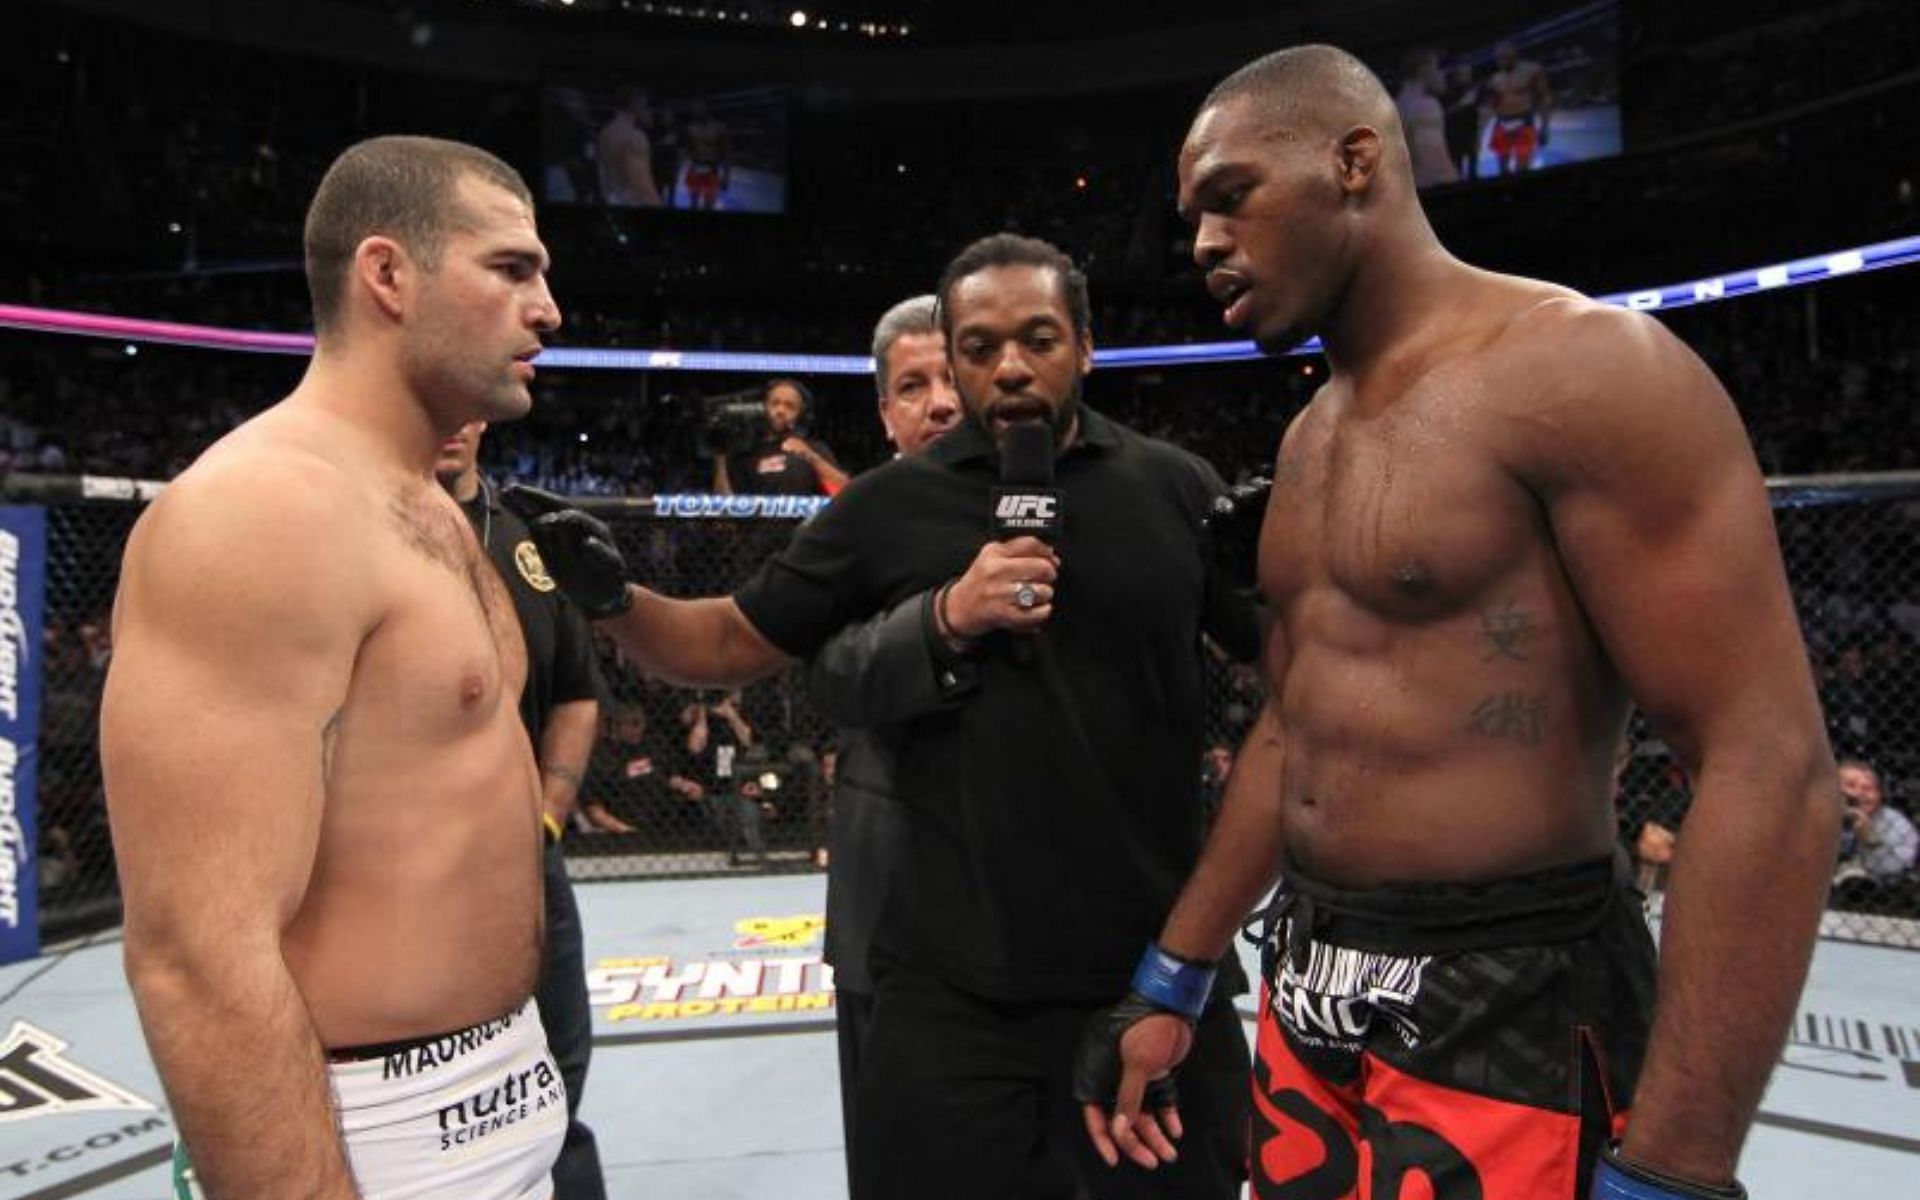 Jon Jones (right) in his first title fight against Mauricio Rua (left) at UFC 128 [Photo Courtesy of Getty Images]